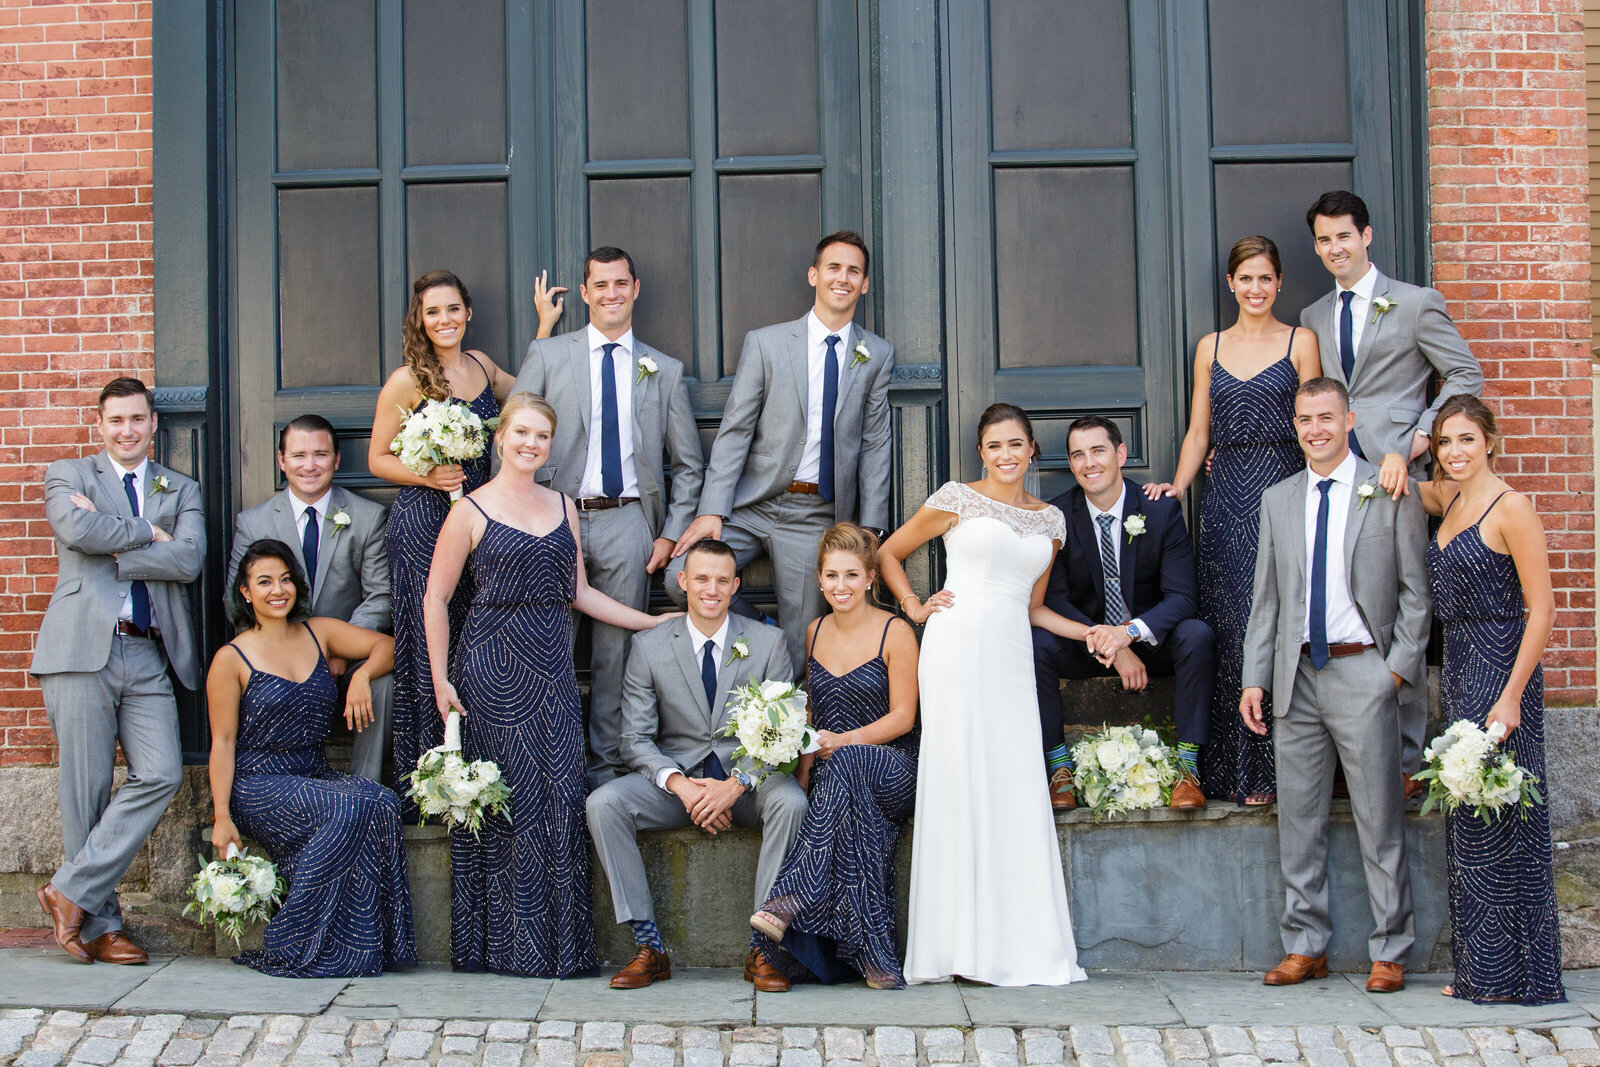 wedding party poses on city street